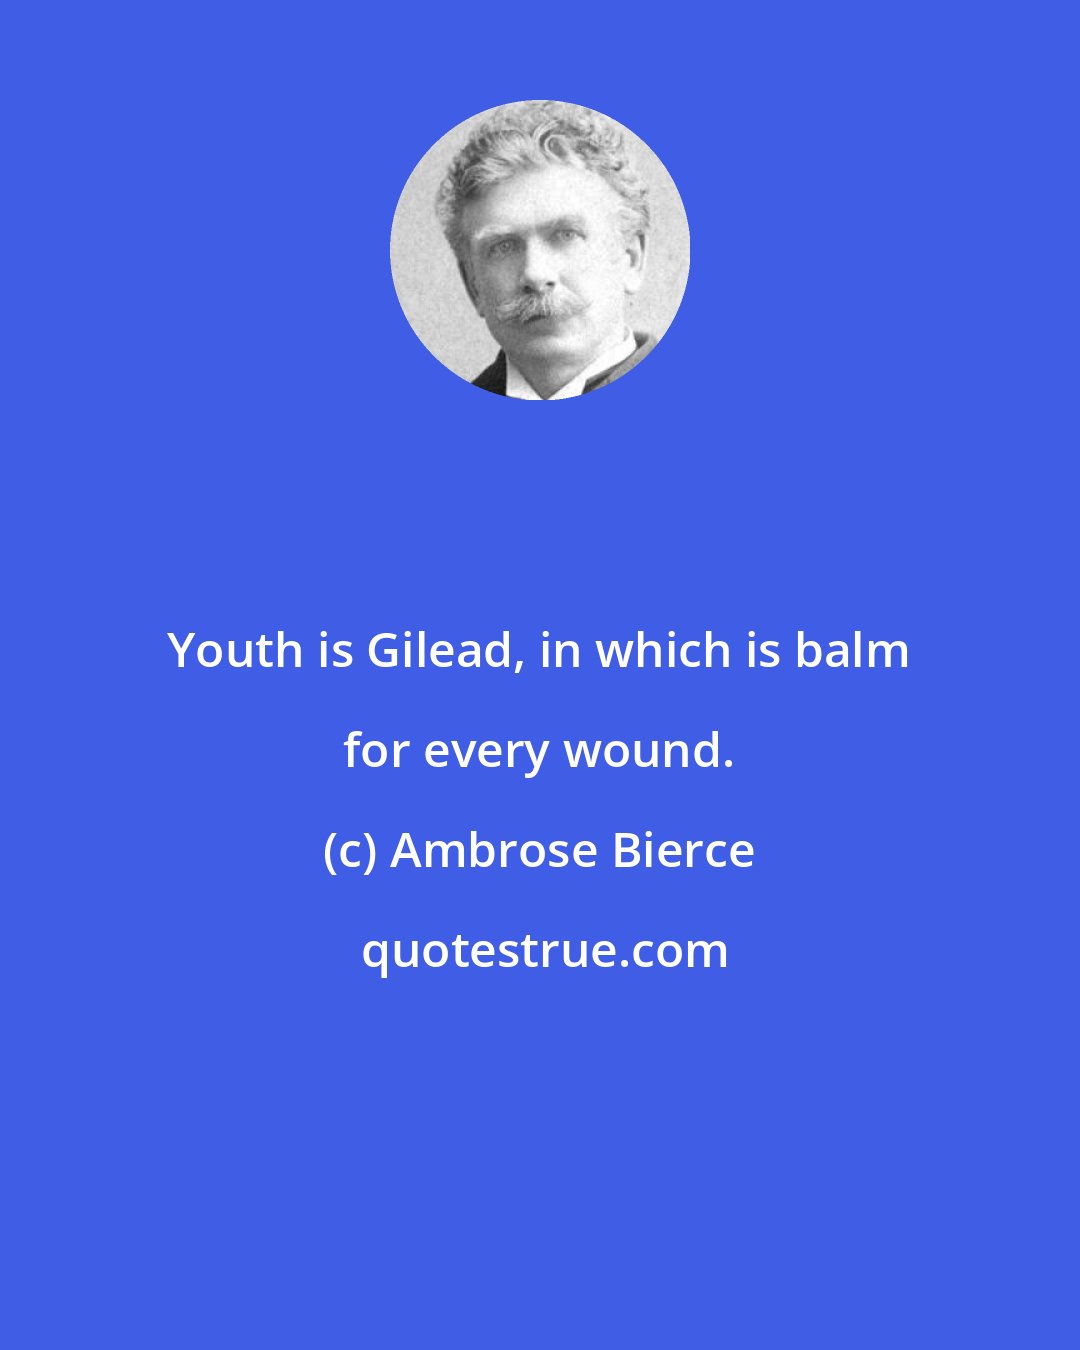 Ambrose Bierce: Youth is Gilead, in which is balm for every wound.